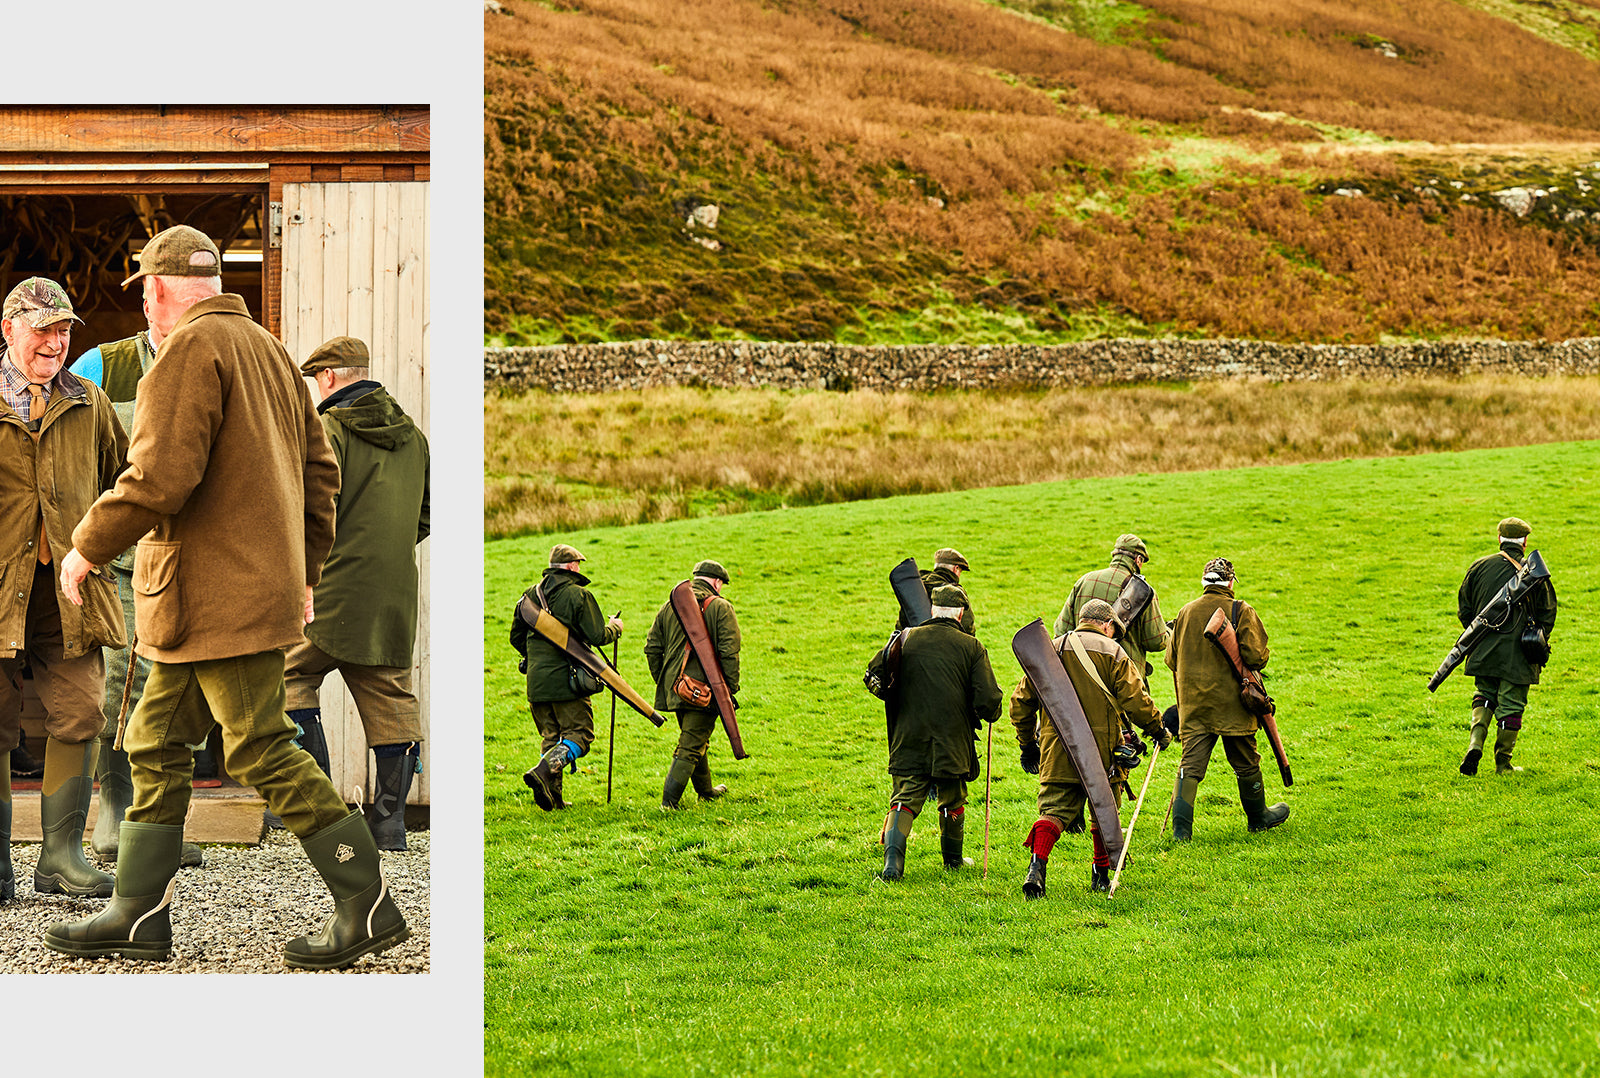 Main image of the Aberdeen Lads hunting club walking through a field with moorland in he background. Inset is a few of the Aberdeen Lads socialising outside a building, all wearing Muck Boot wellingtons